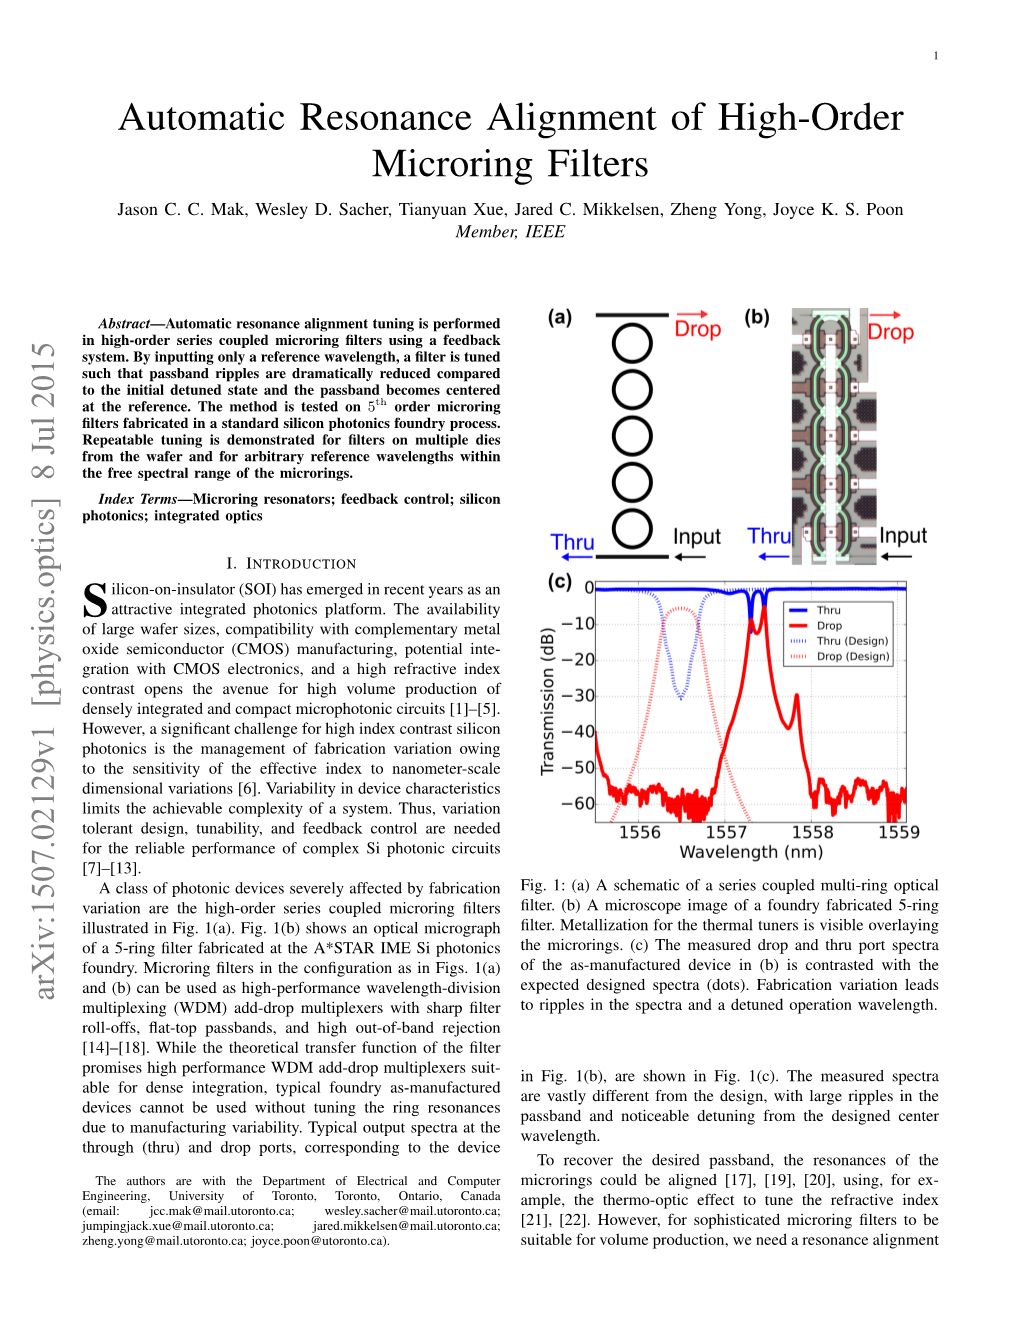 Automatic Resonance Alignment of High-Order Microring Filters Jason C